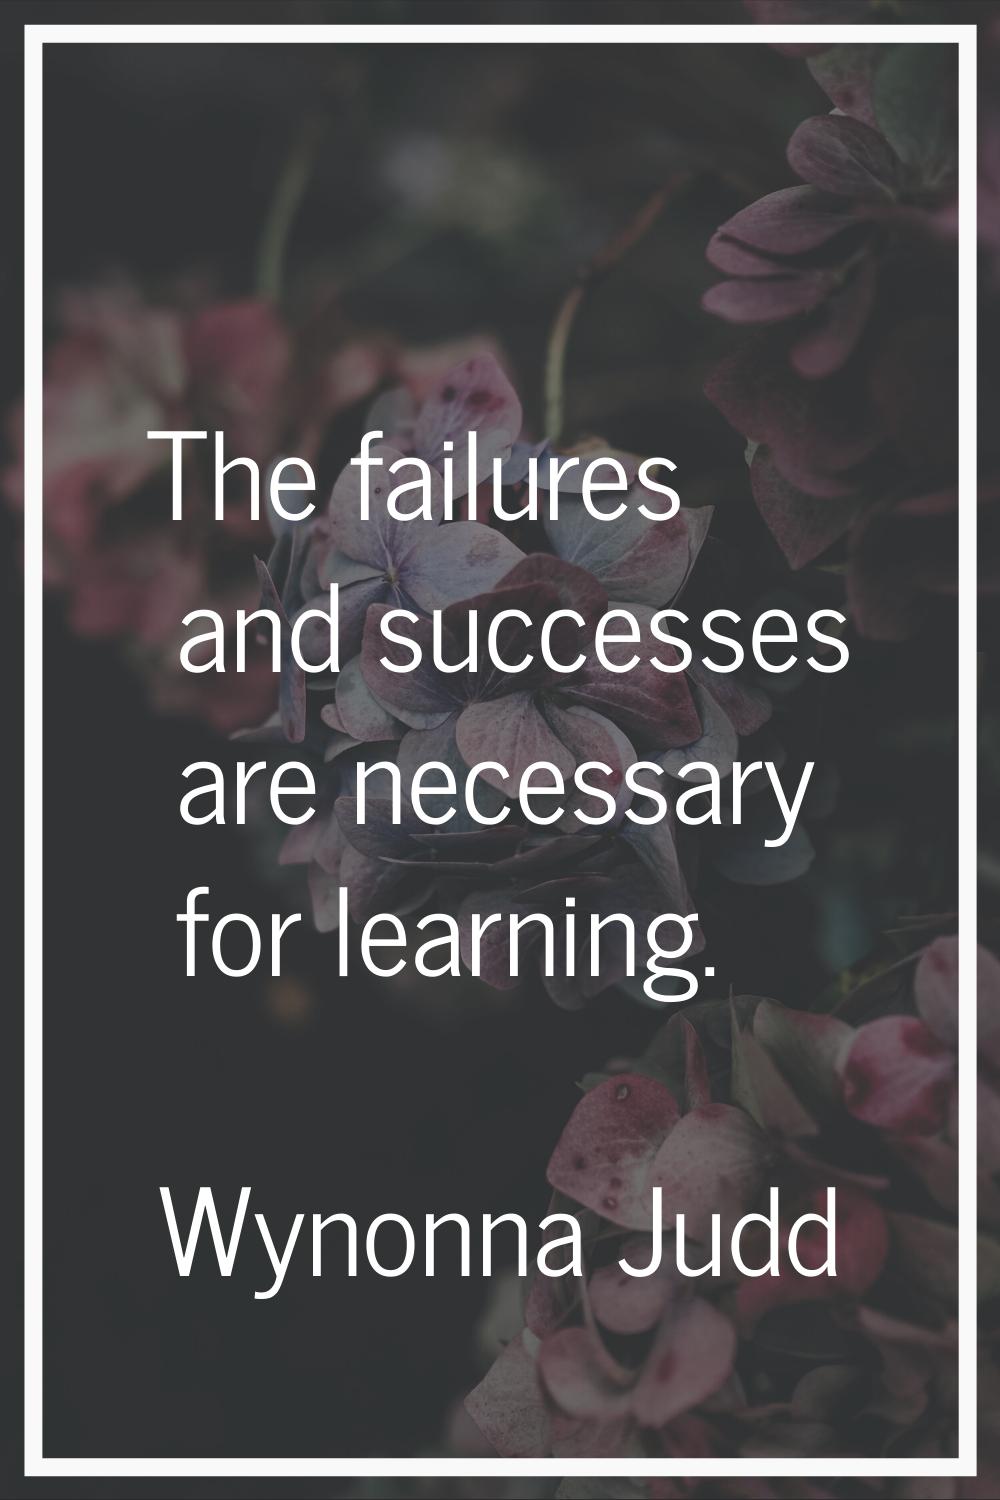 The failures and successes are necessary for learning.